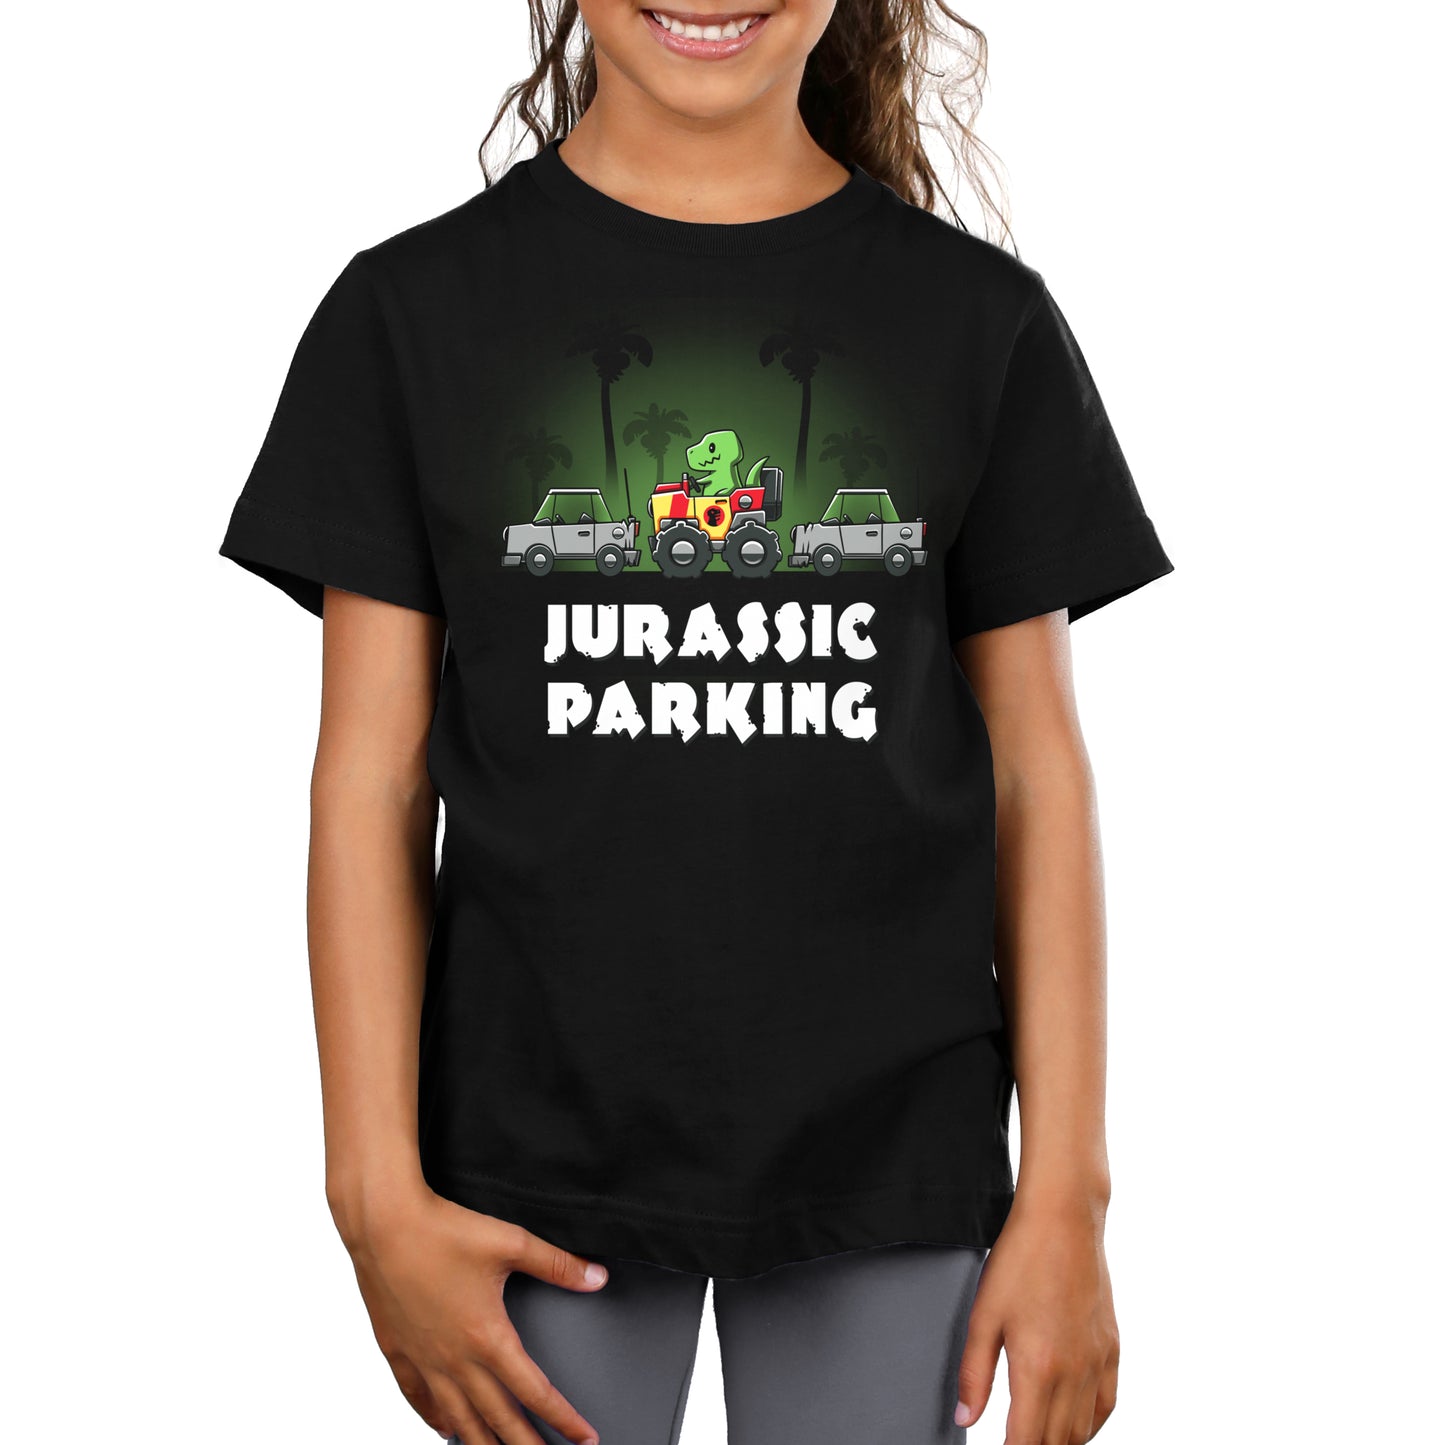 A girl wearing a black t-shirt that says TeeTurtle Jurassic Parking.